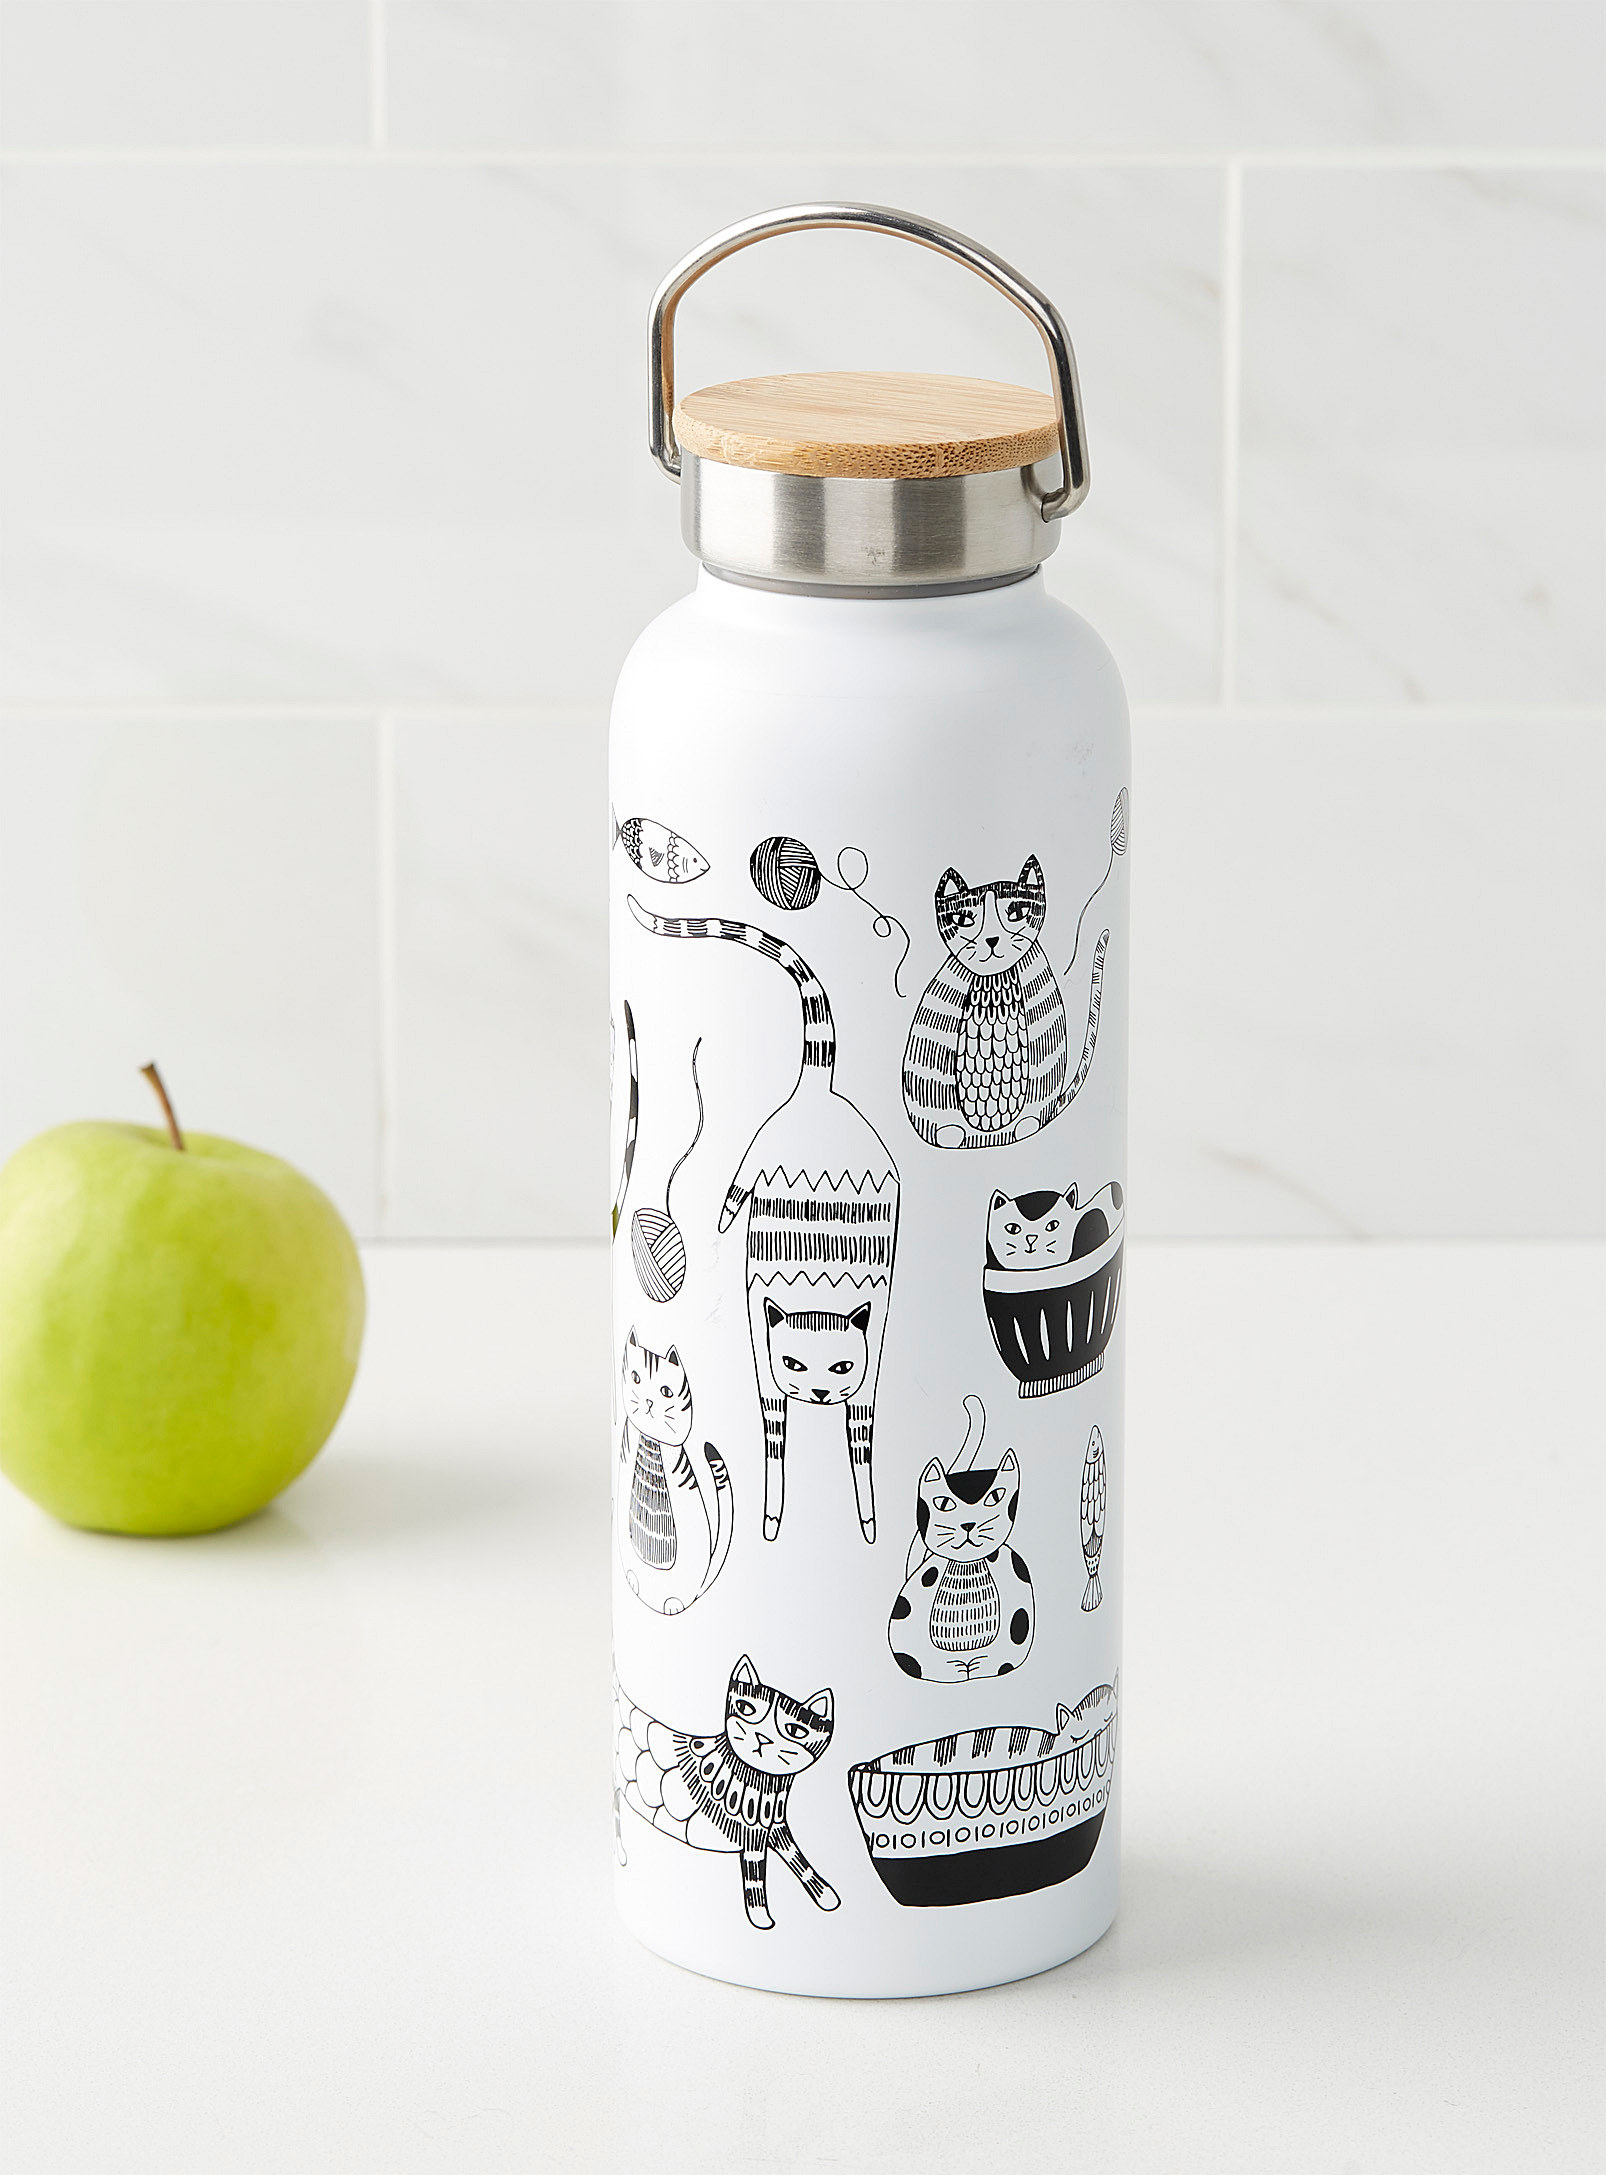 A stainless steel bottle with a cute cat pattern designed on it